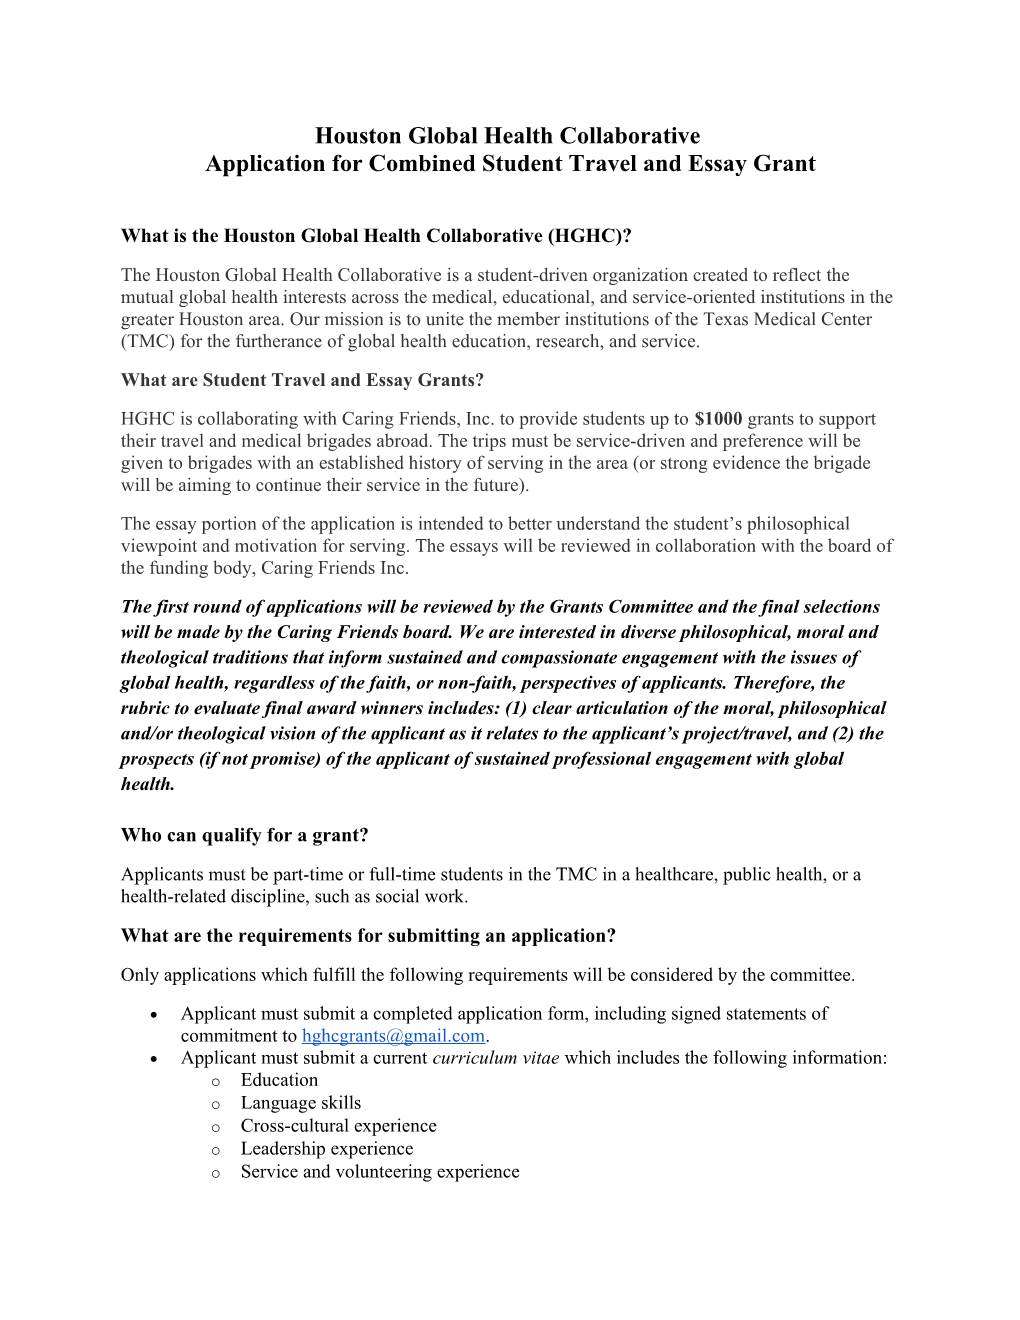 HGHC Student Travel Grant Application